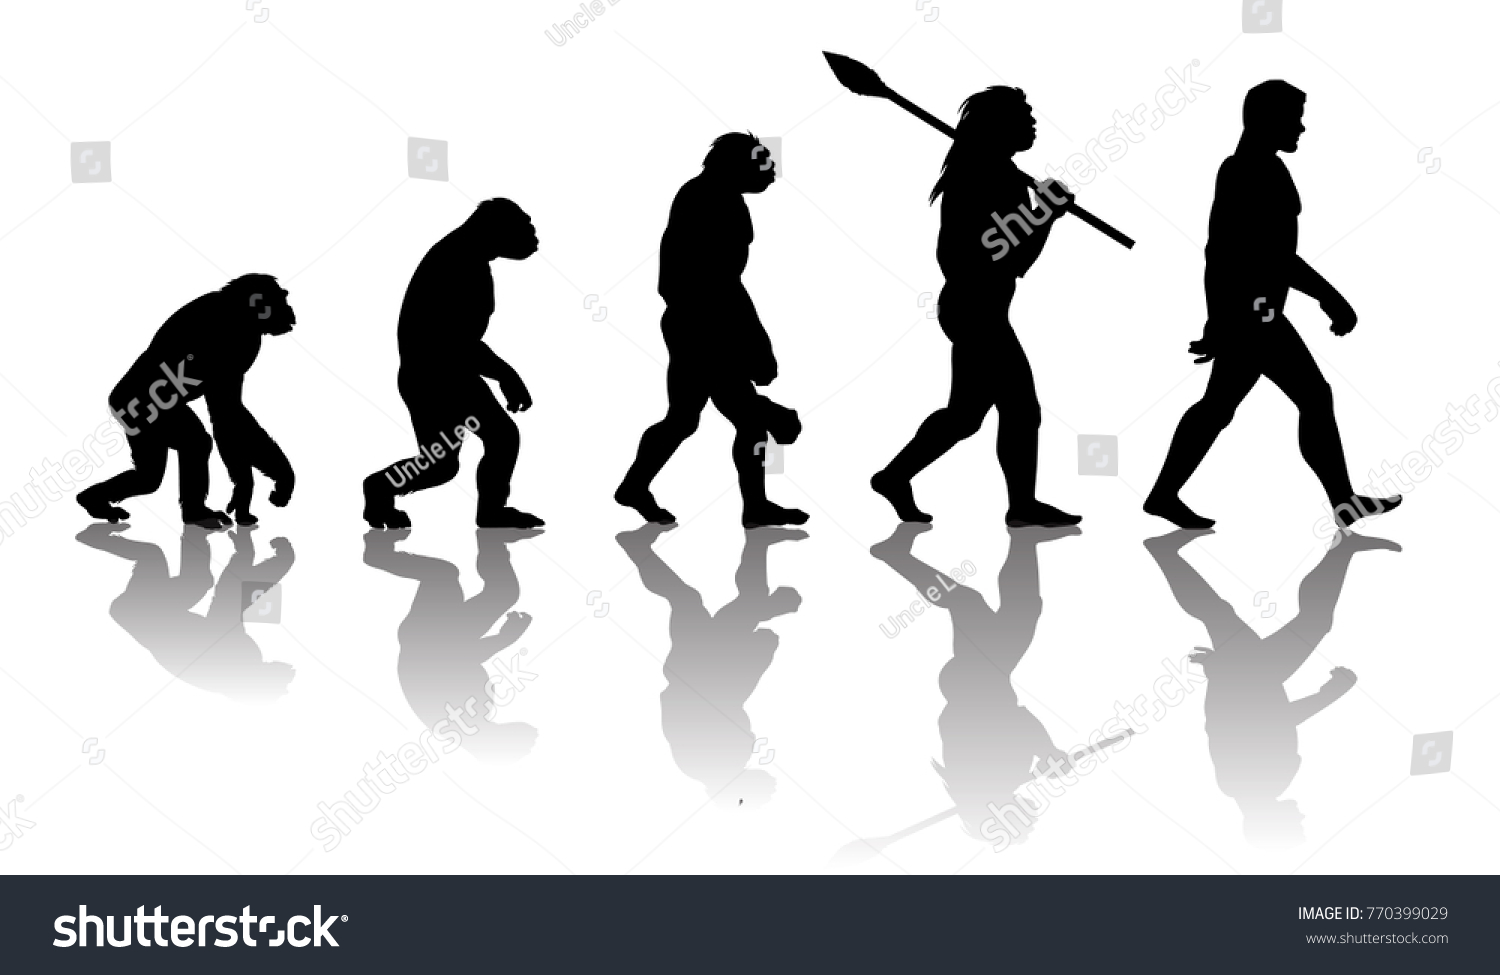 SVG of Theory of evolution of man. Silhouette with reflection. Human development. Hand drawn sketch vector illustration isolated on white svg